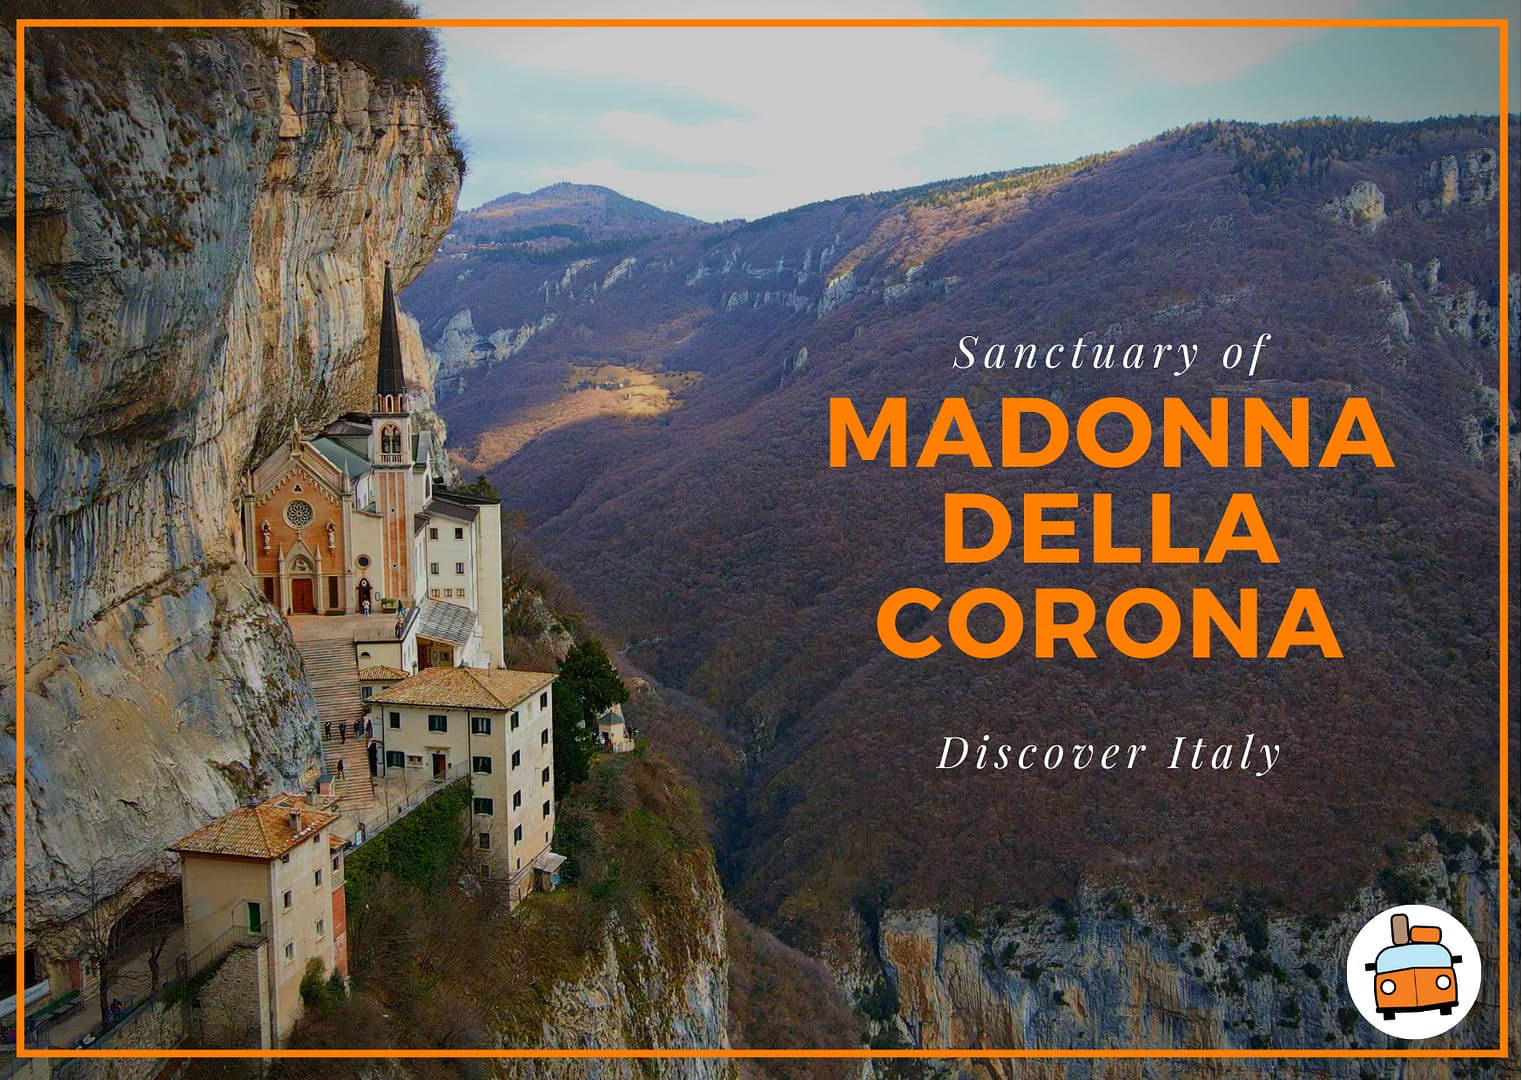 madonna della corona - how to visit the church on the mountain in northern italy